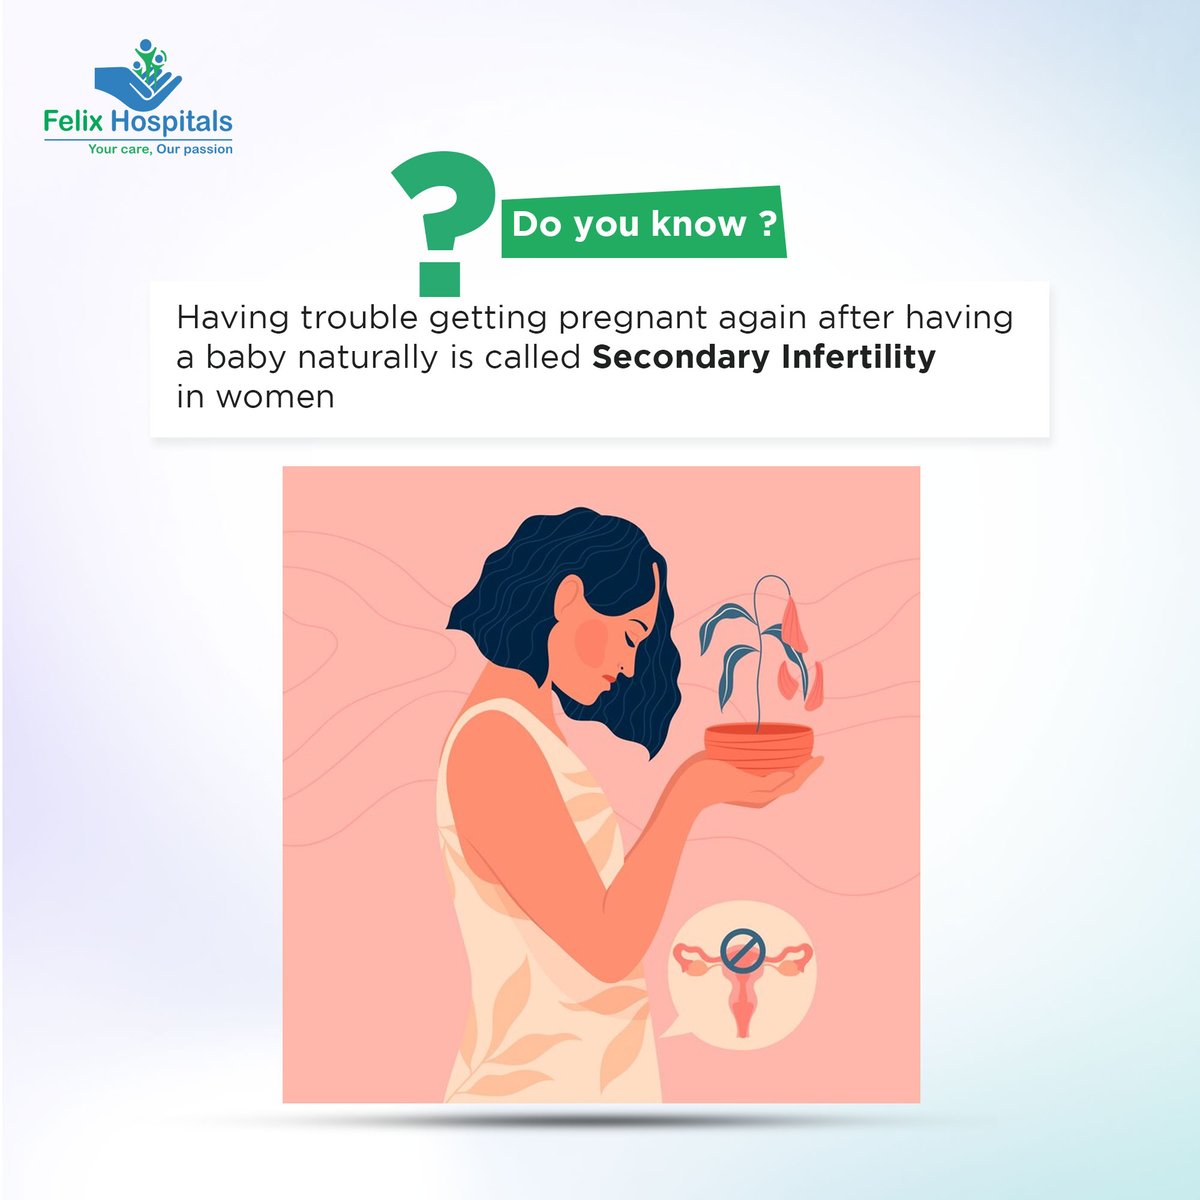 Secondary infertility is common. It can be caused by factors like age or past pregnancies. If you're facing this, know you're not alone. Talk to a doctor and take support.

#Infertility #secondaryinfertility #hormonalimbalance #healthcheckup #exploremore #besthospitalinnoida